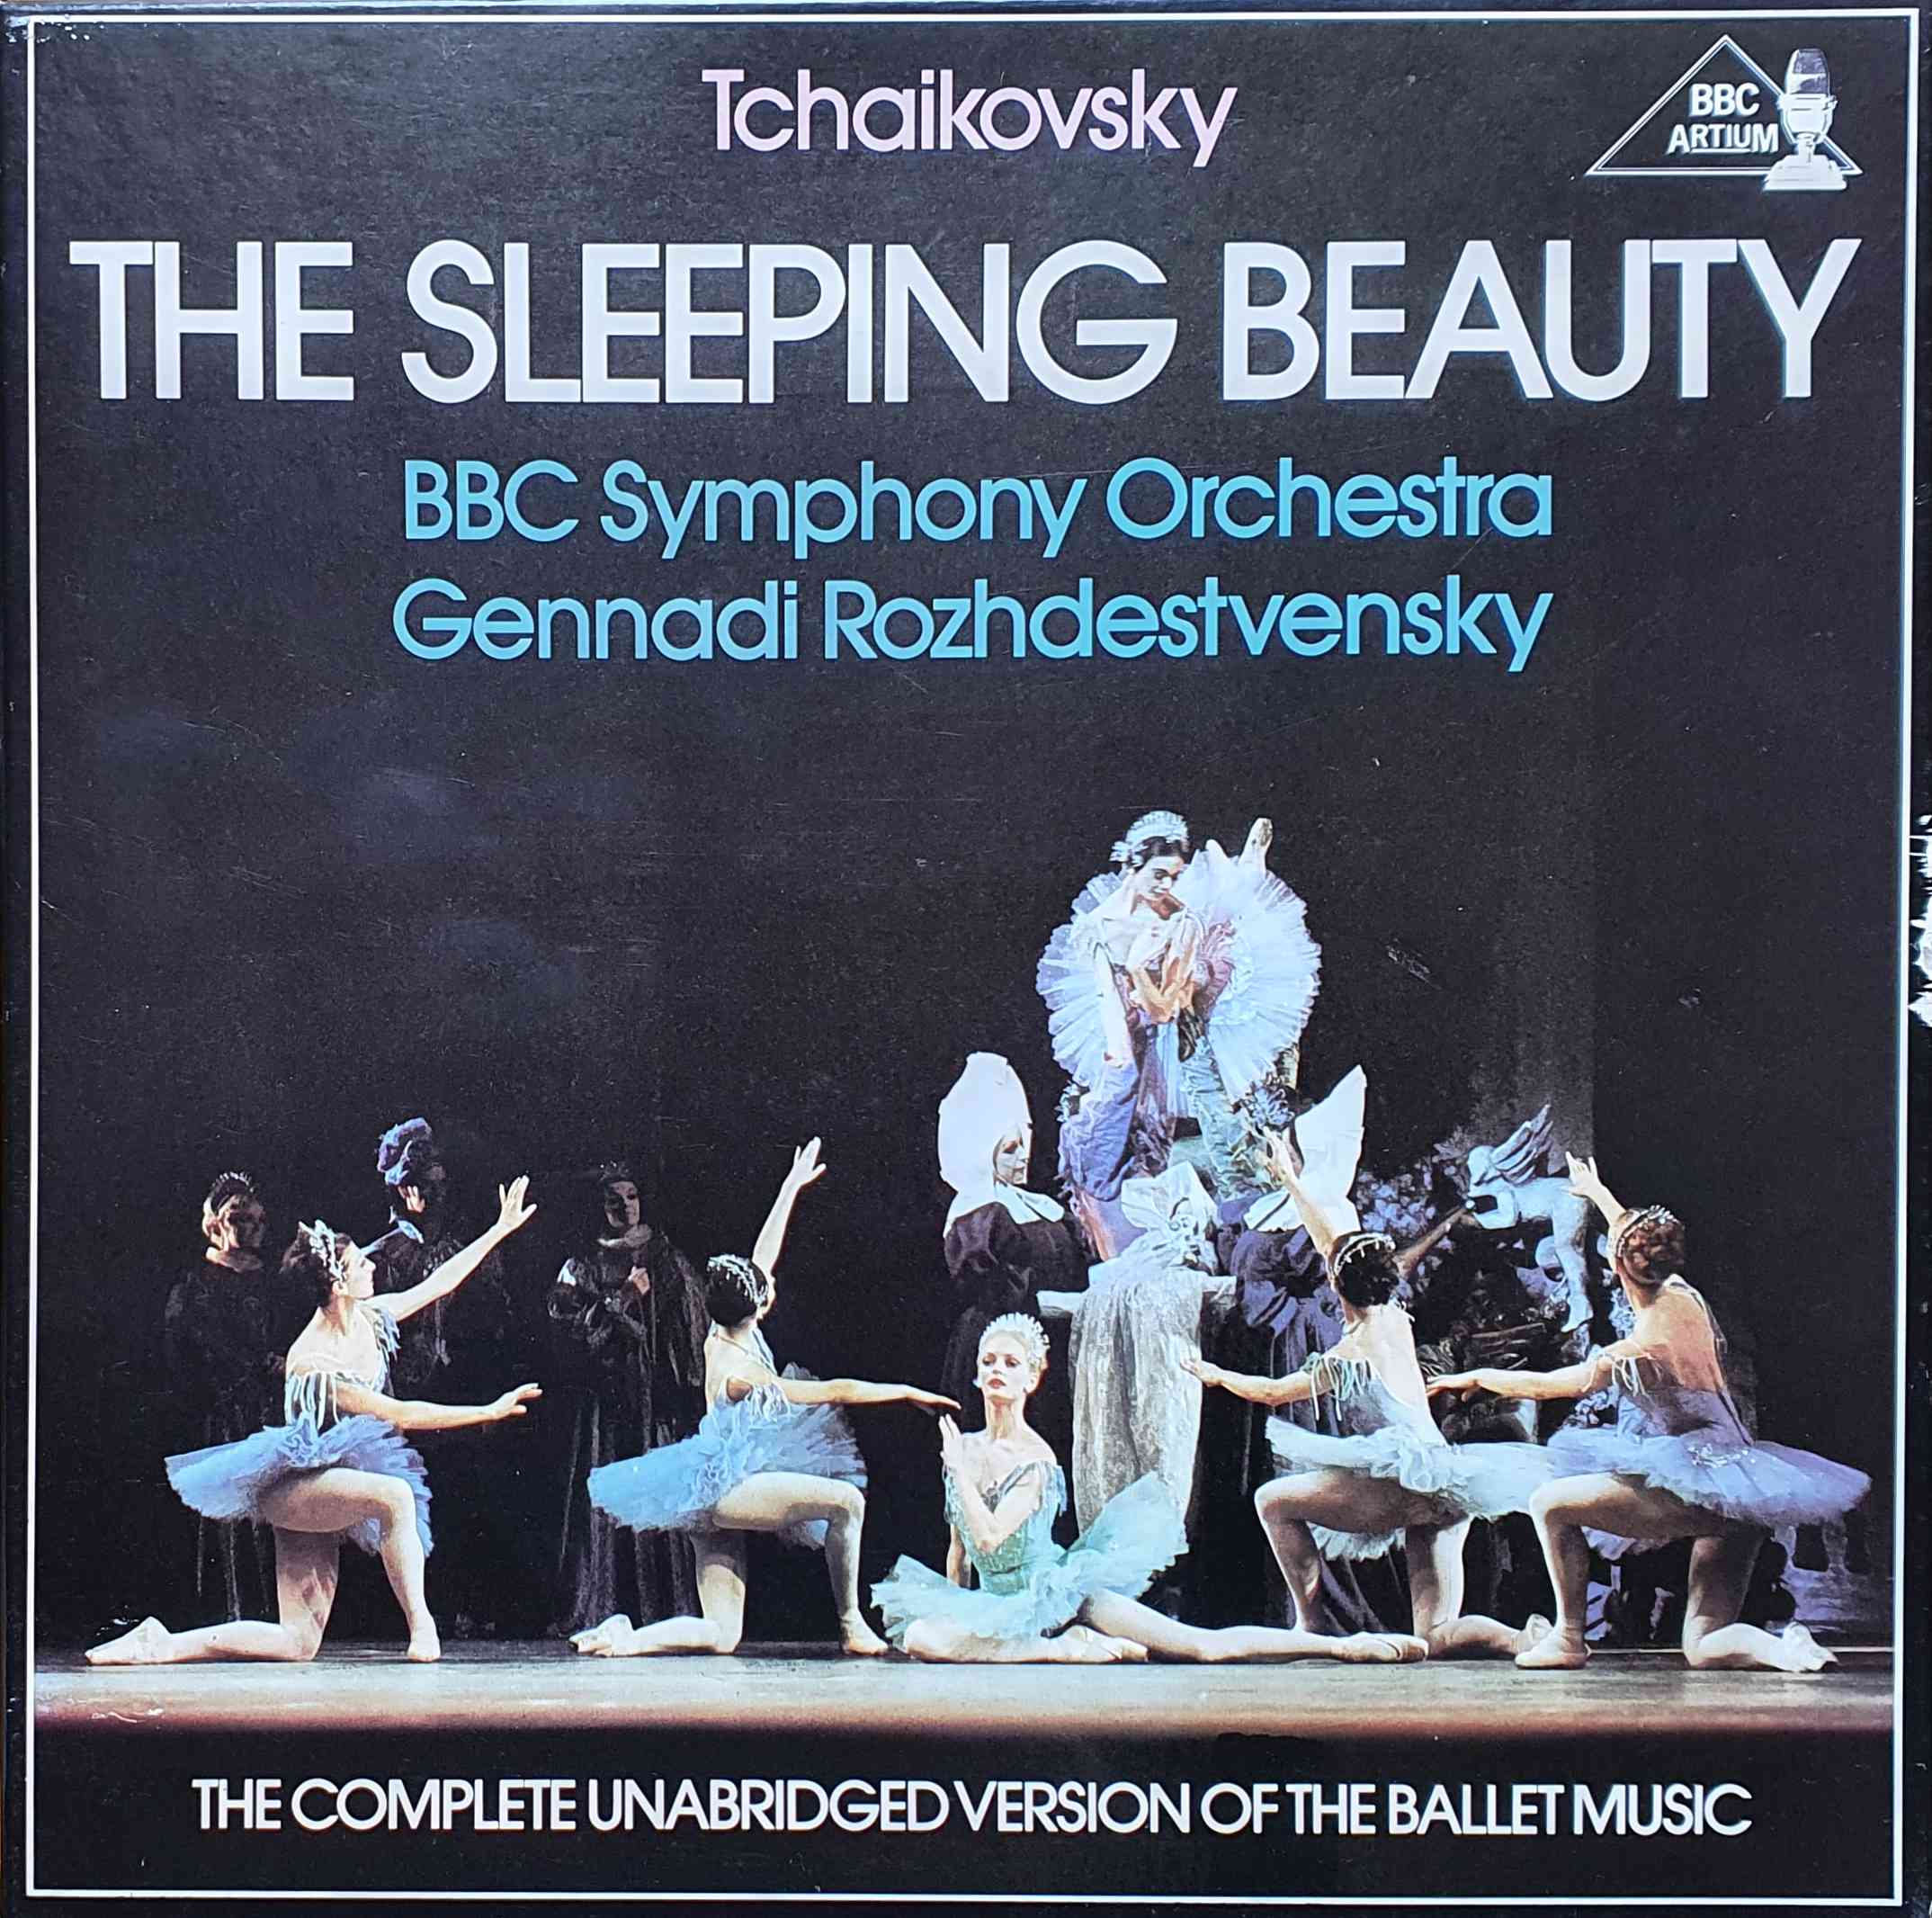 Picture of BBC 3001 The sleeping beauty by artist Tchaikovsky from the BBC albums - Records and Tapes library